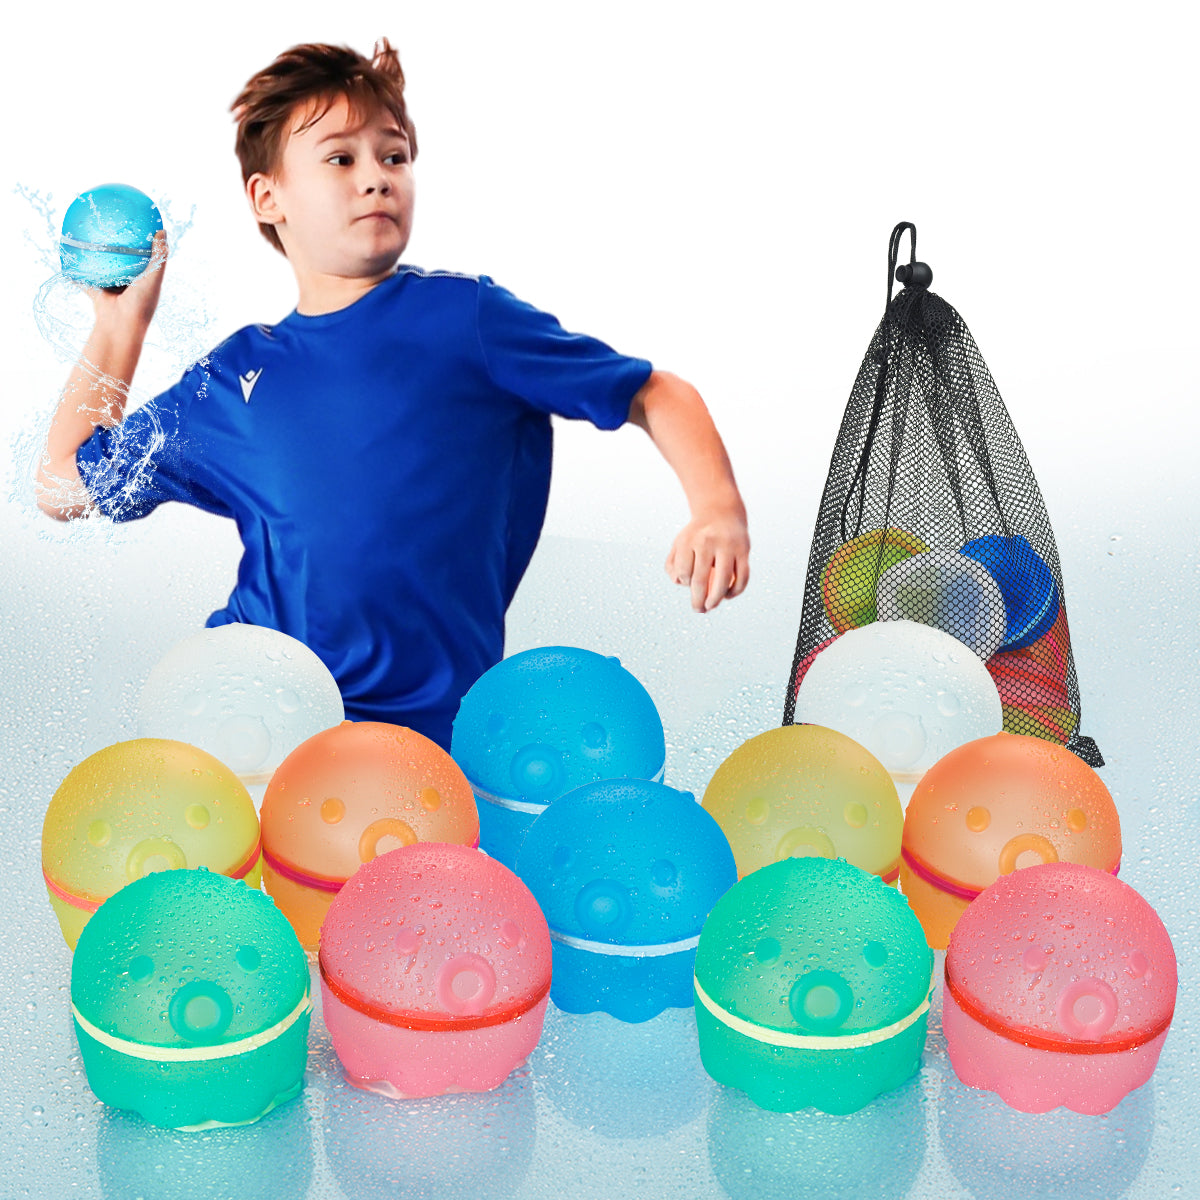 Hiliop Reusable Water Balloons for Kids, Splash Refillable Water Balloons Bombs Self Sealing Quick Fill Magnetic with Mesh Bag-Octopus 8/12/16/32/48 pcs